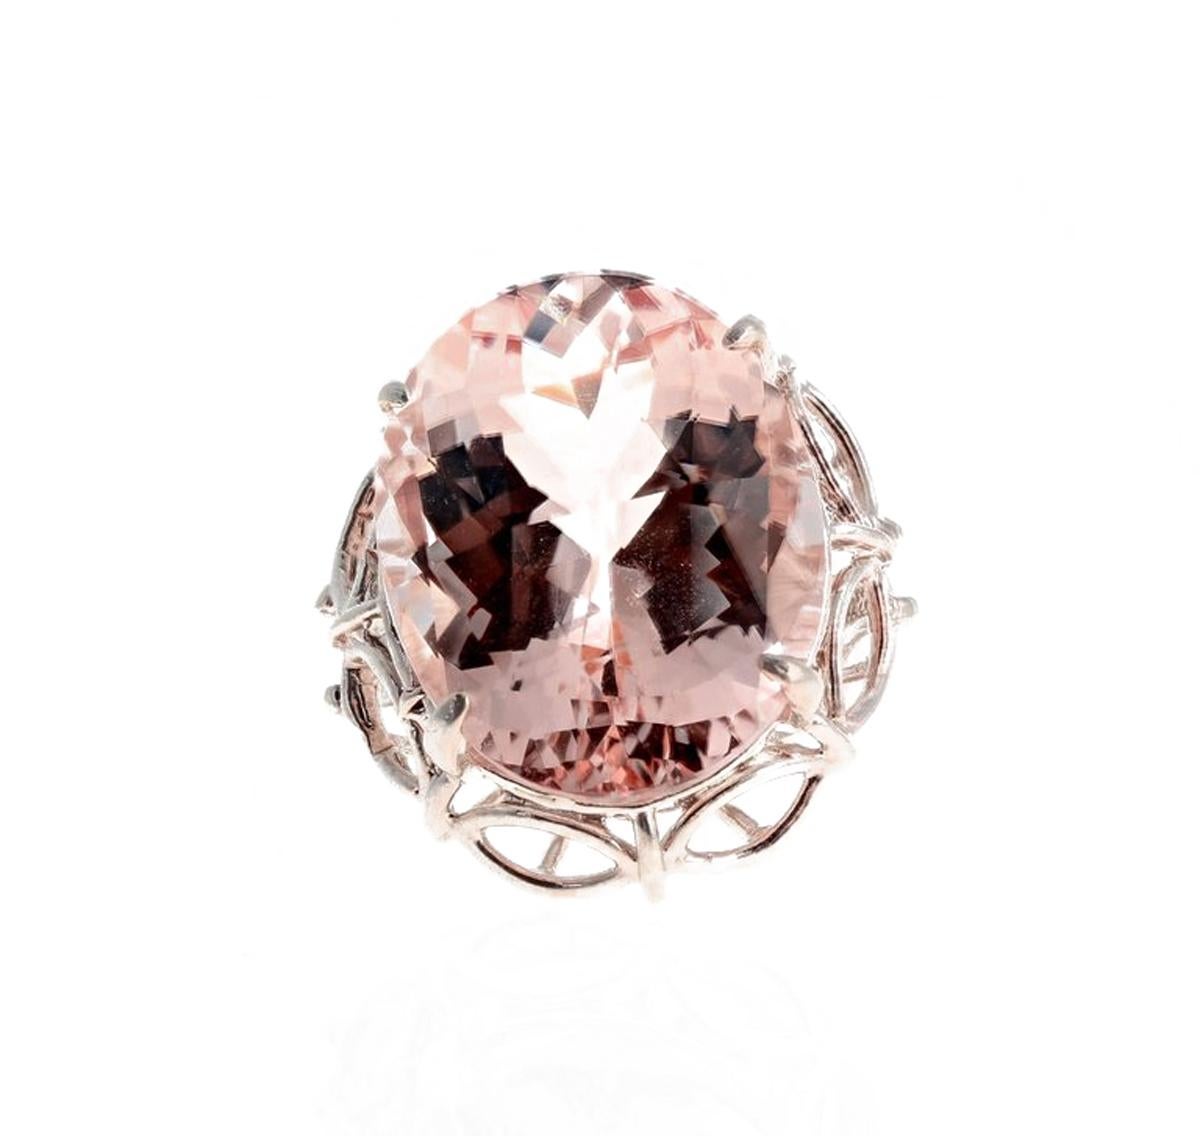 AJD Enormous Glowing Clear 30 Ct. Morganite Sterling Silver Cocktail Ring In New Condition For Sale In Raleigh, NC